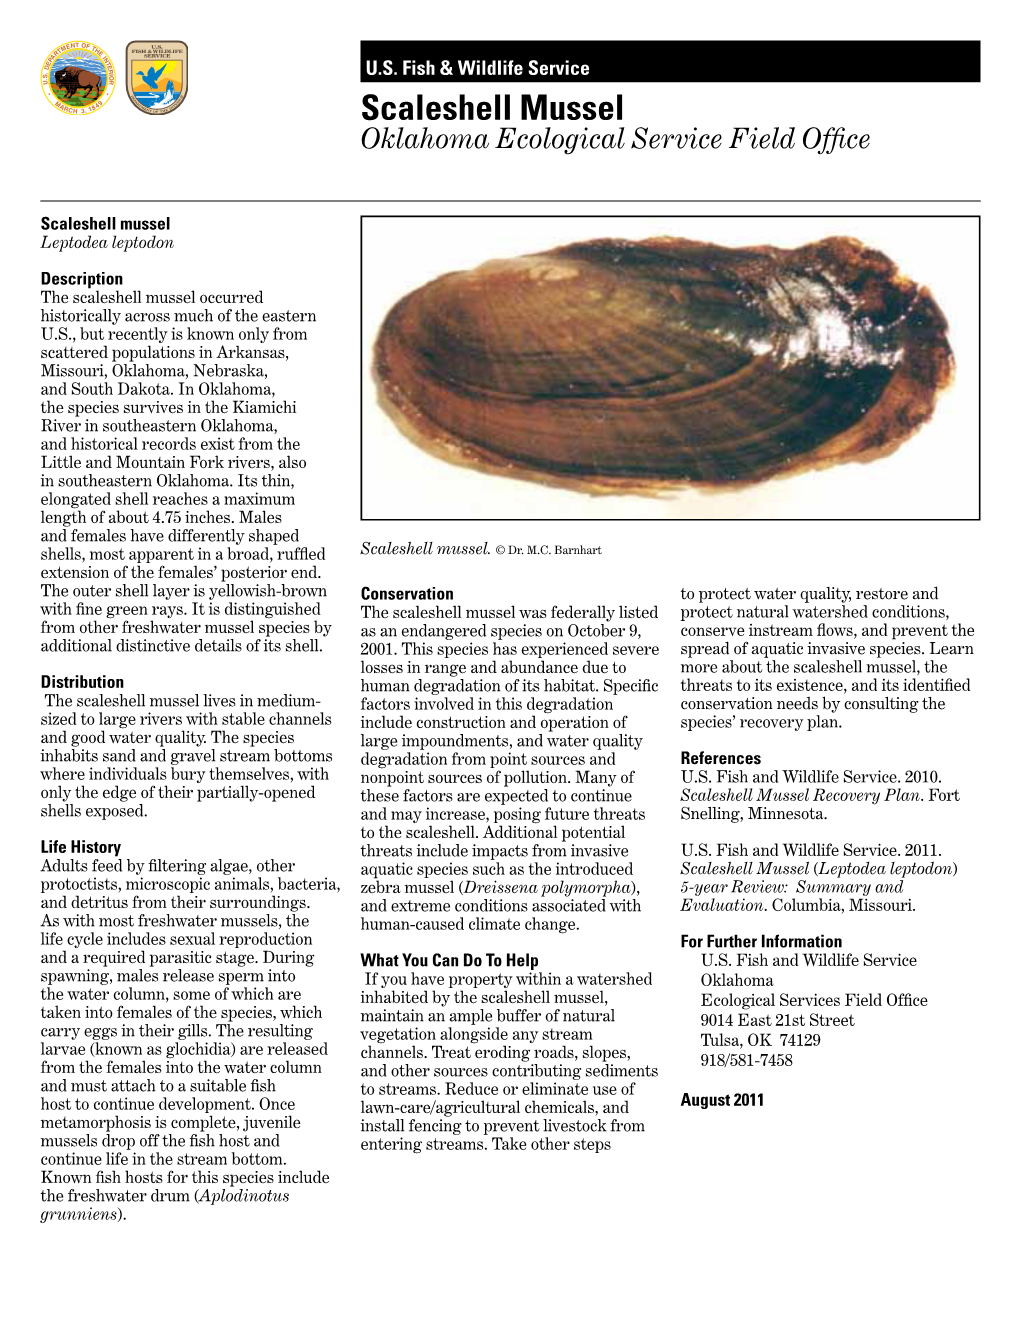 Scaleshell Mussel.Pdf